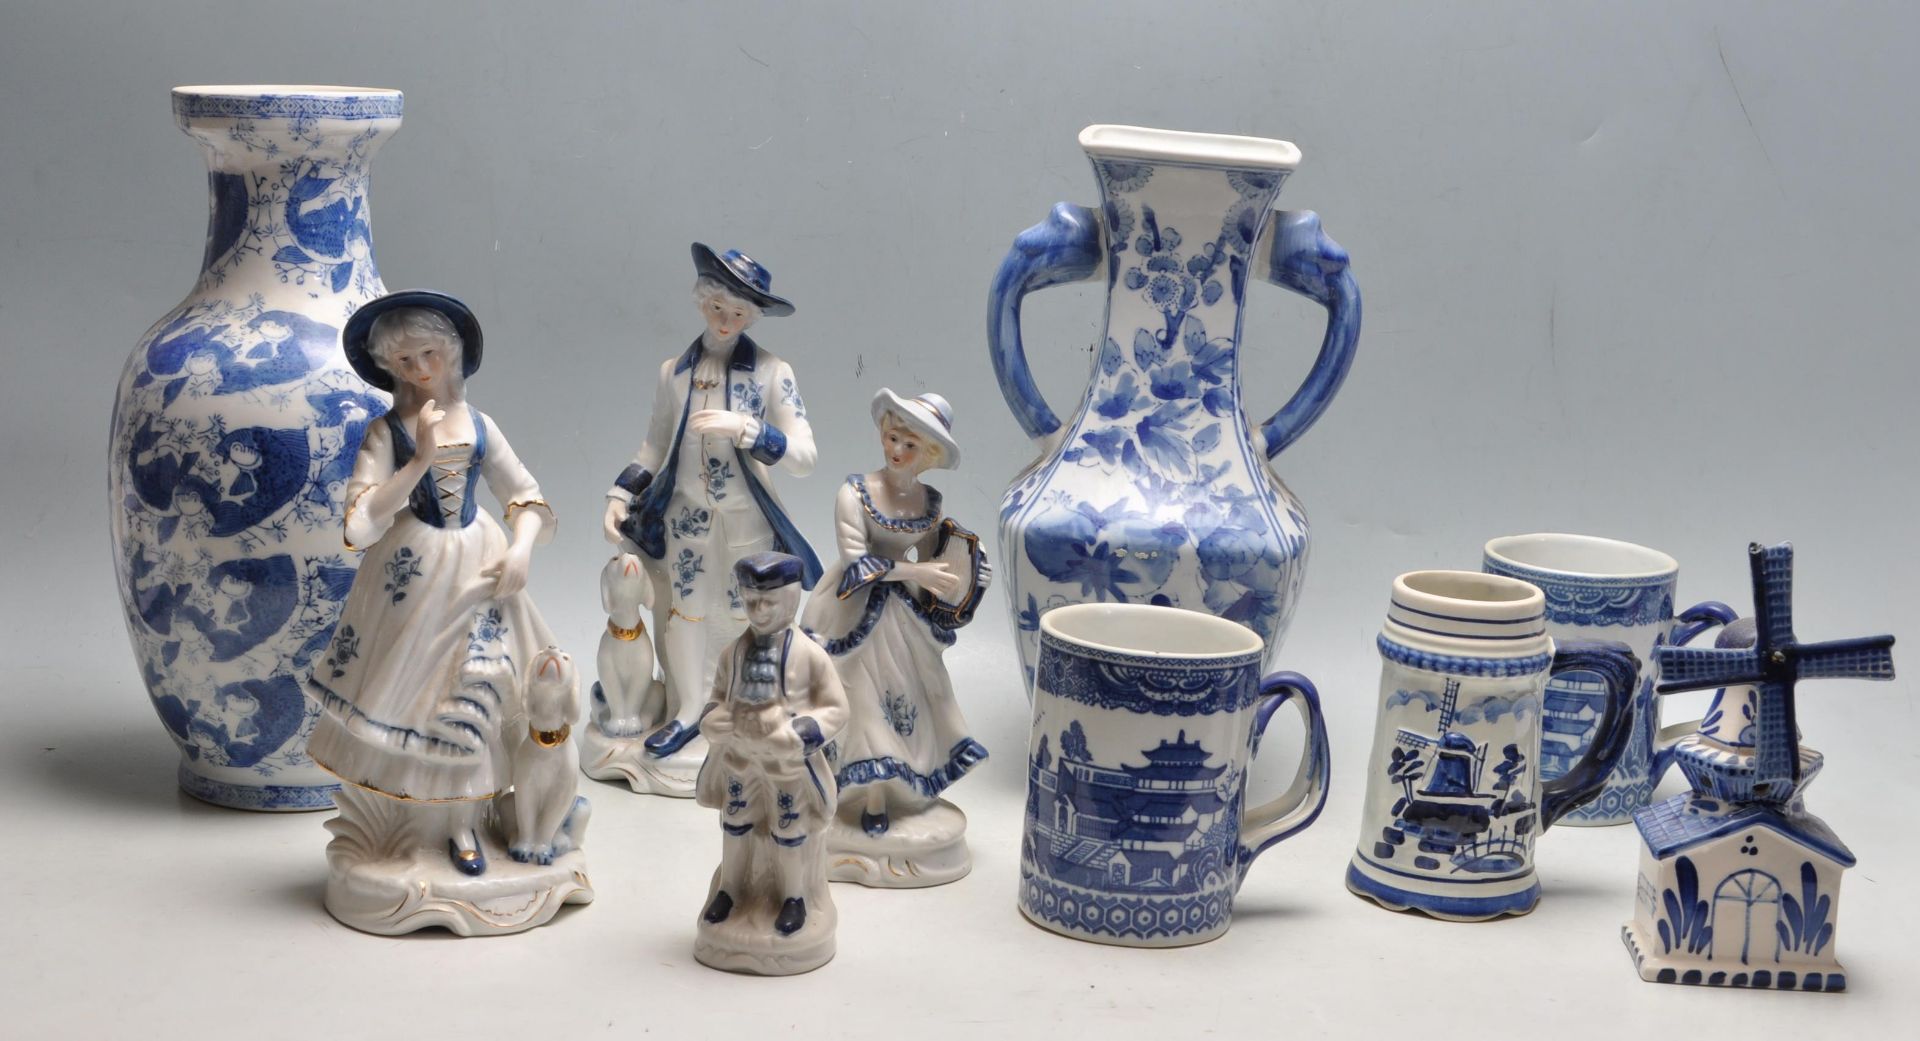 LARGE QUANTITY OF BLUE AND WHITE CERAMIC WARE / FIGURINES